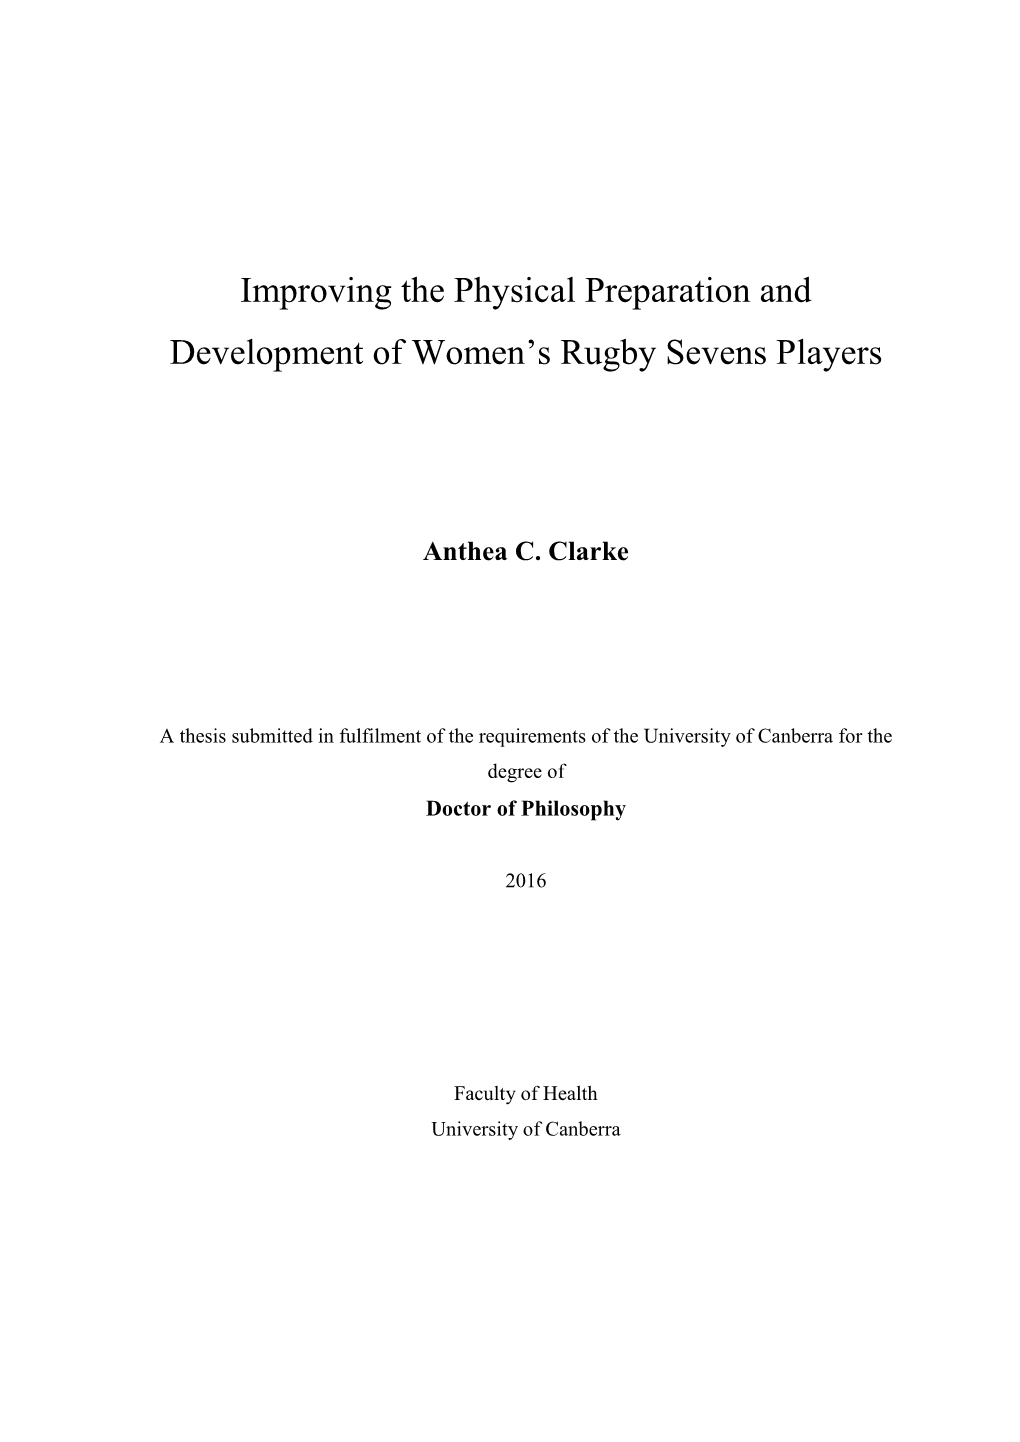 Improving the Physical Preparation and Development of Women's Rugby Sevens Players